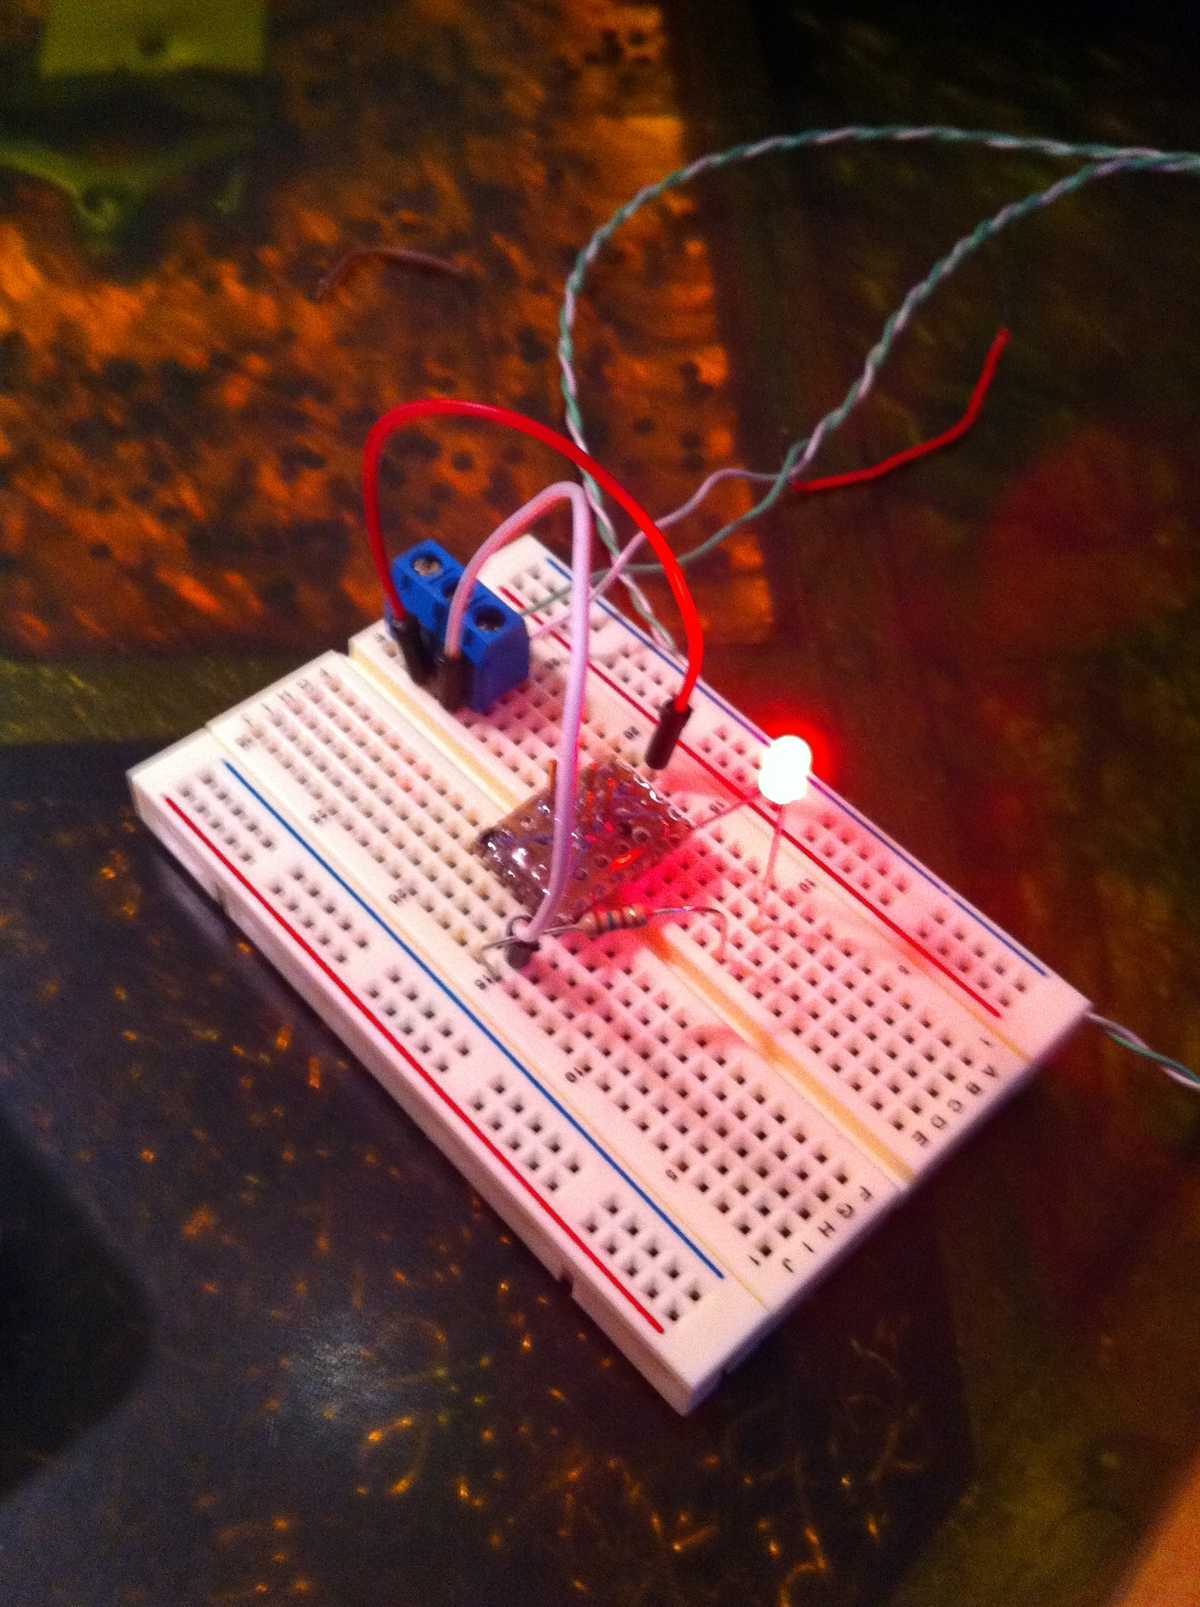 A first go at the Stardweeny using an ATtiny13